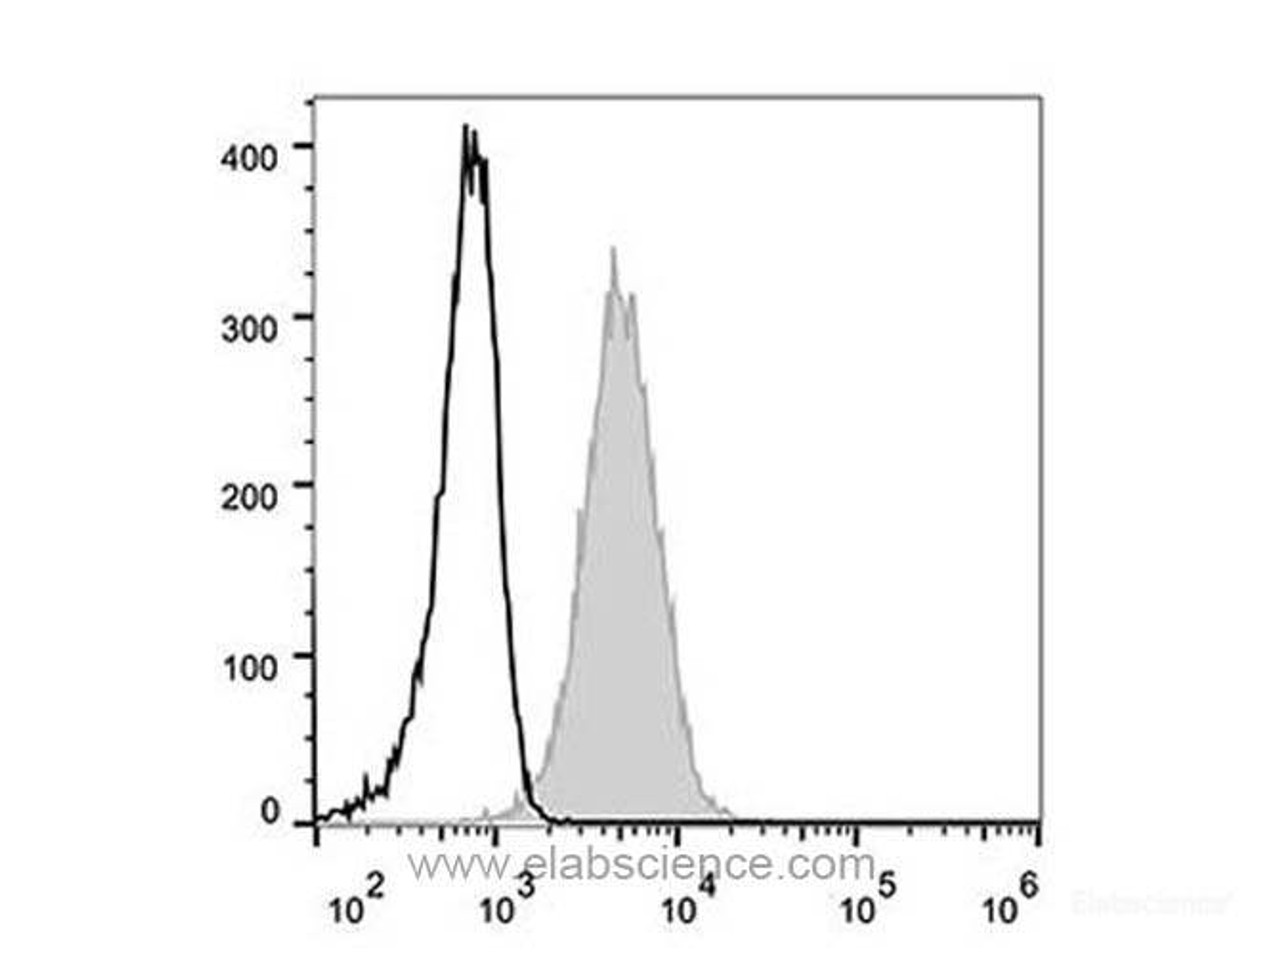 Human peripheral blood lymphocytes are stained with Anti-Human CD81 Monoclonal Antibody (AF488 Conjugated)(filled gray histogram). Unstained lymphocytes (empty black histogram) are used as control.